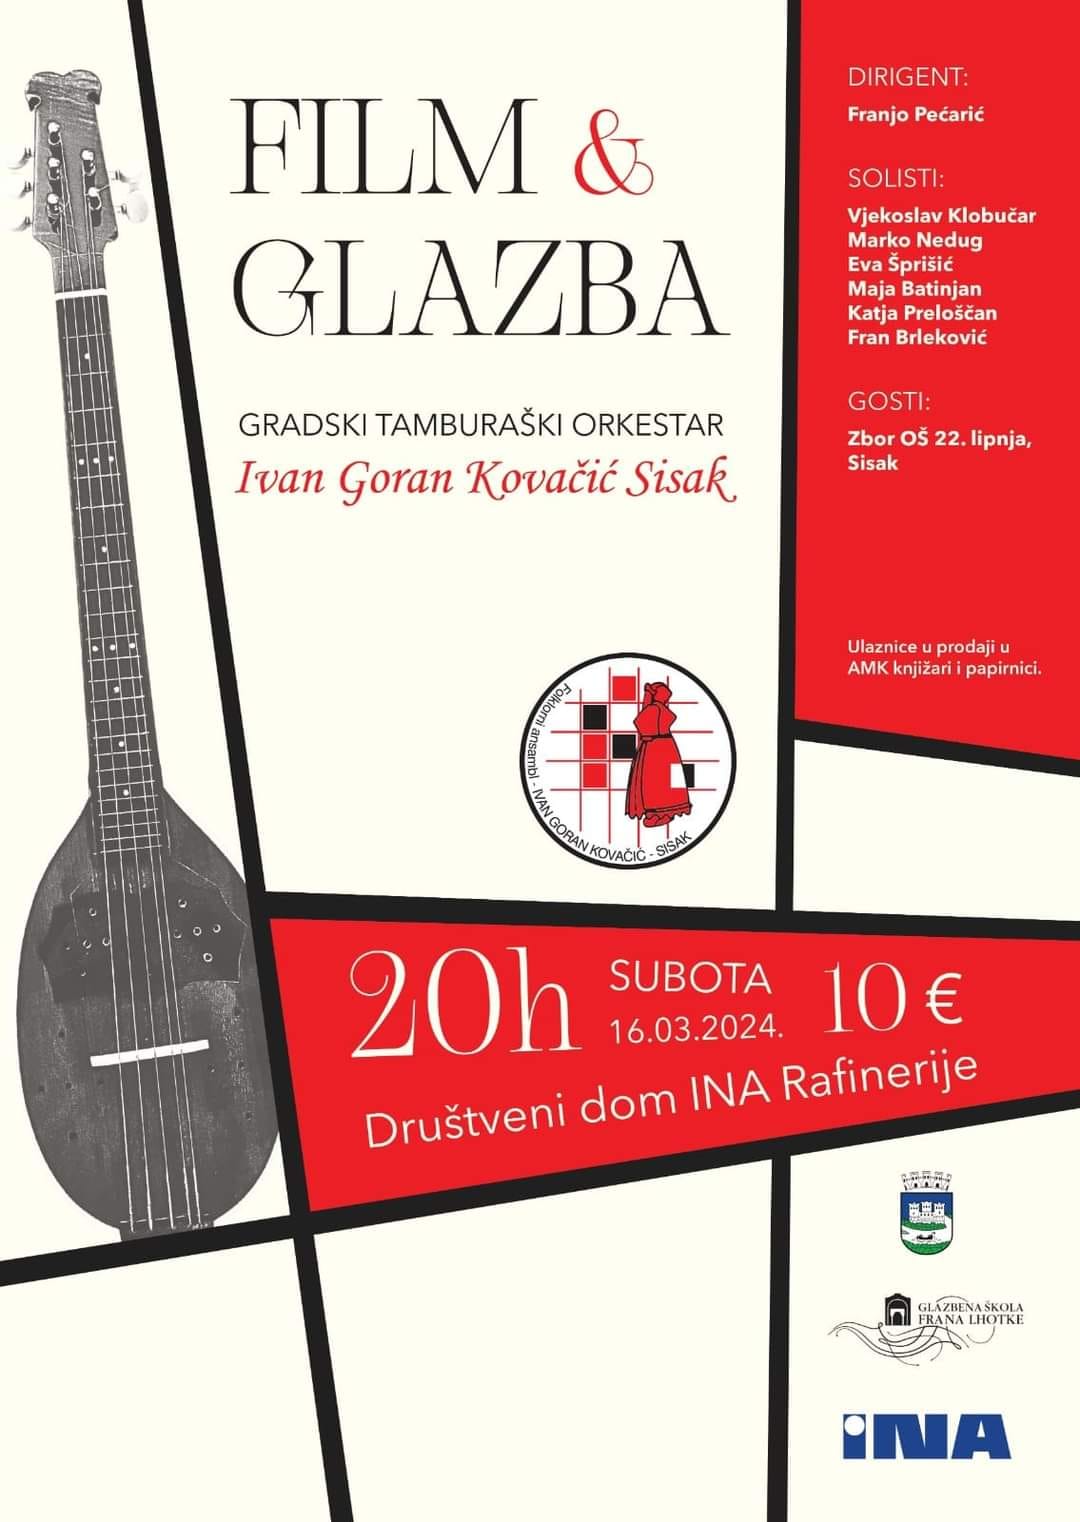 You are currently viewing Koncert pod nazivom “FILM I GLAZBA”